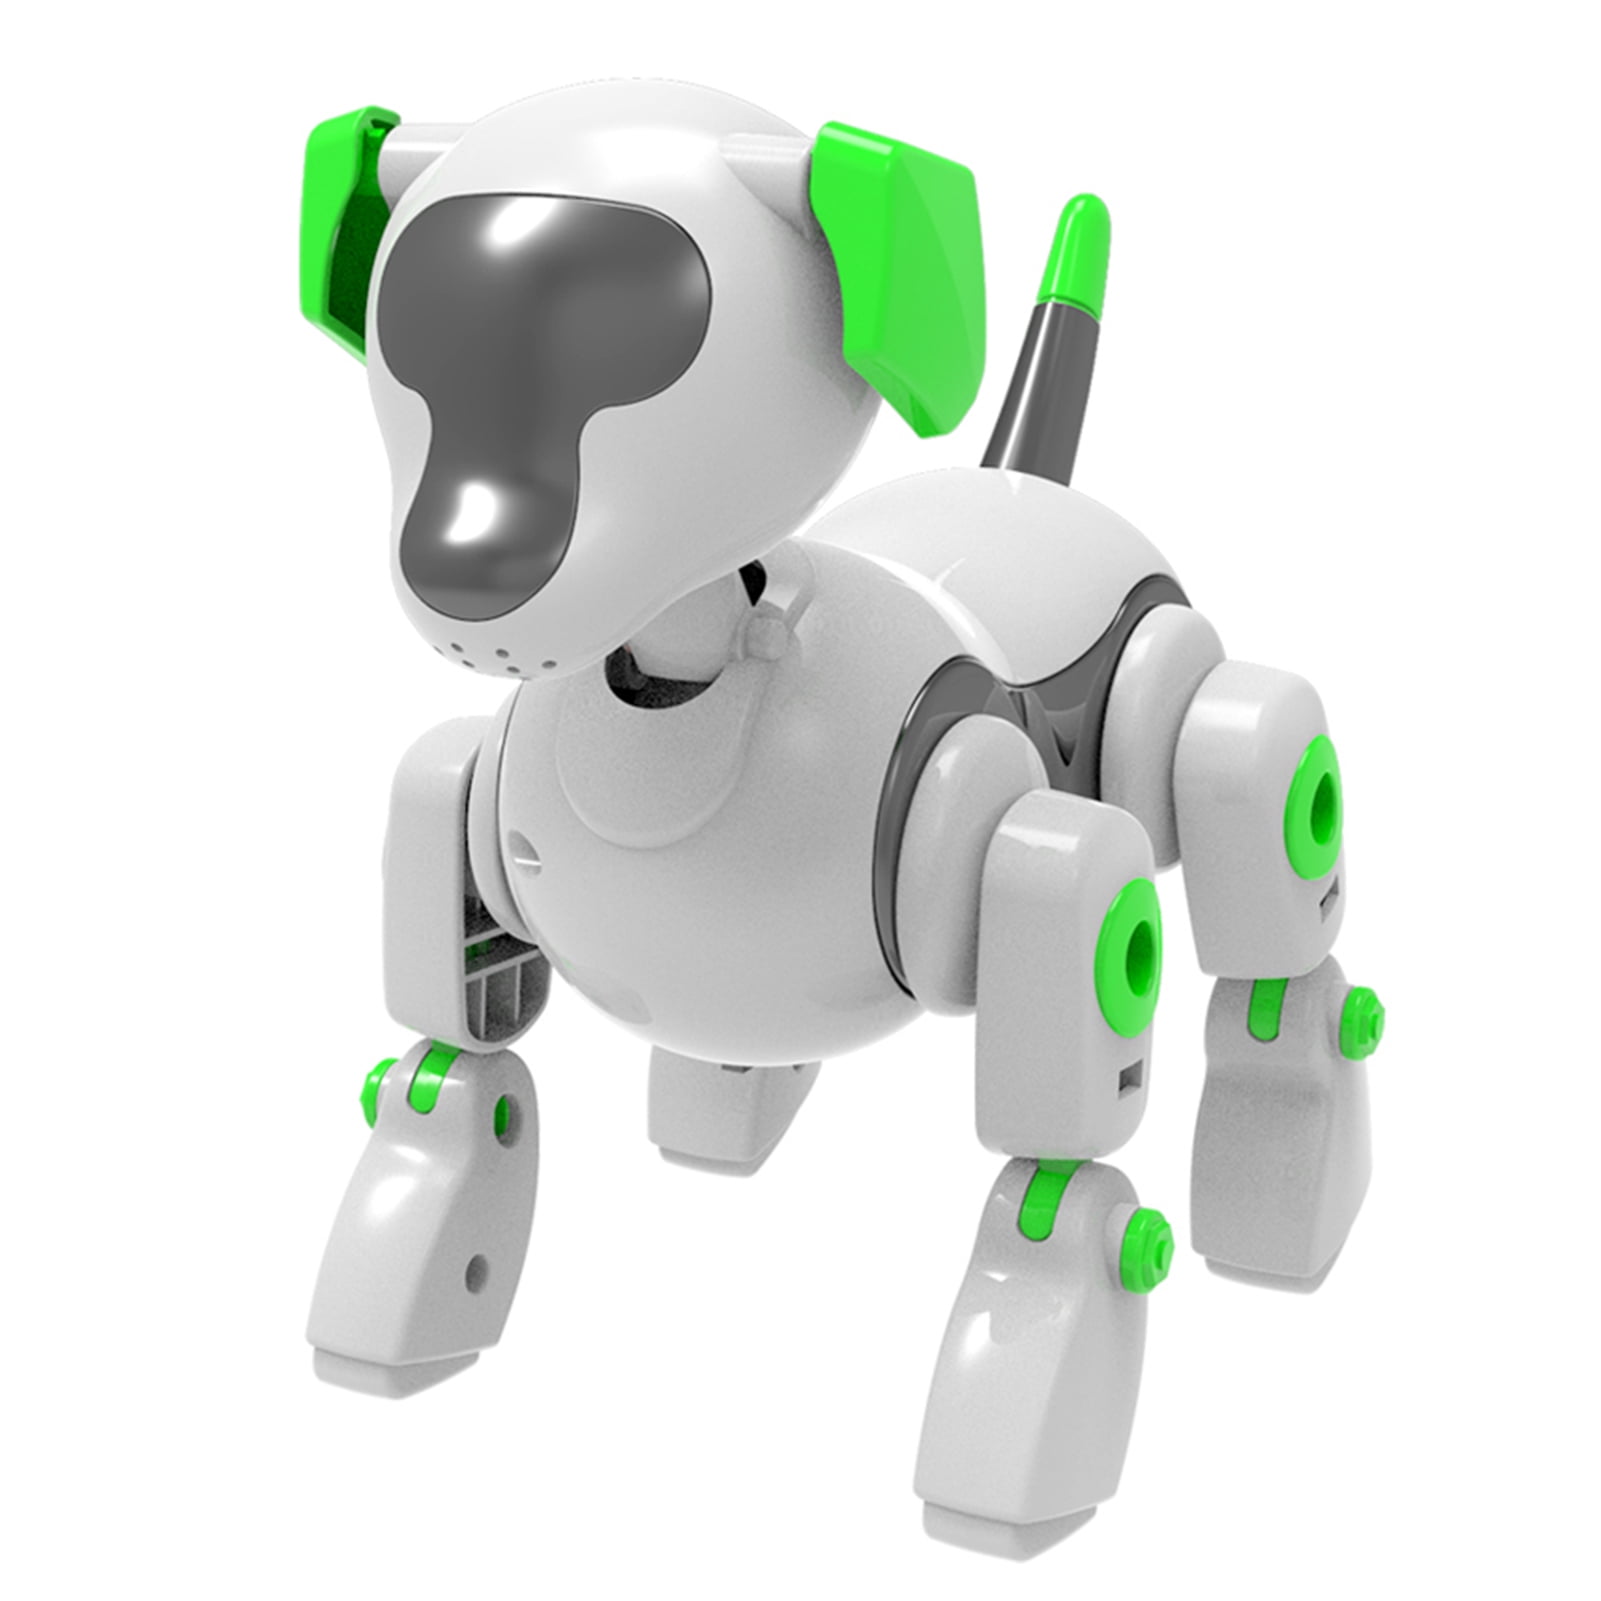 Interactive Remote Control Pet Robot Dog Puppy Educational Toy Gift For Kids 